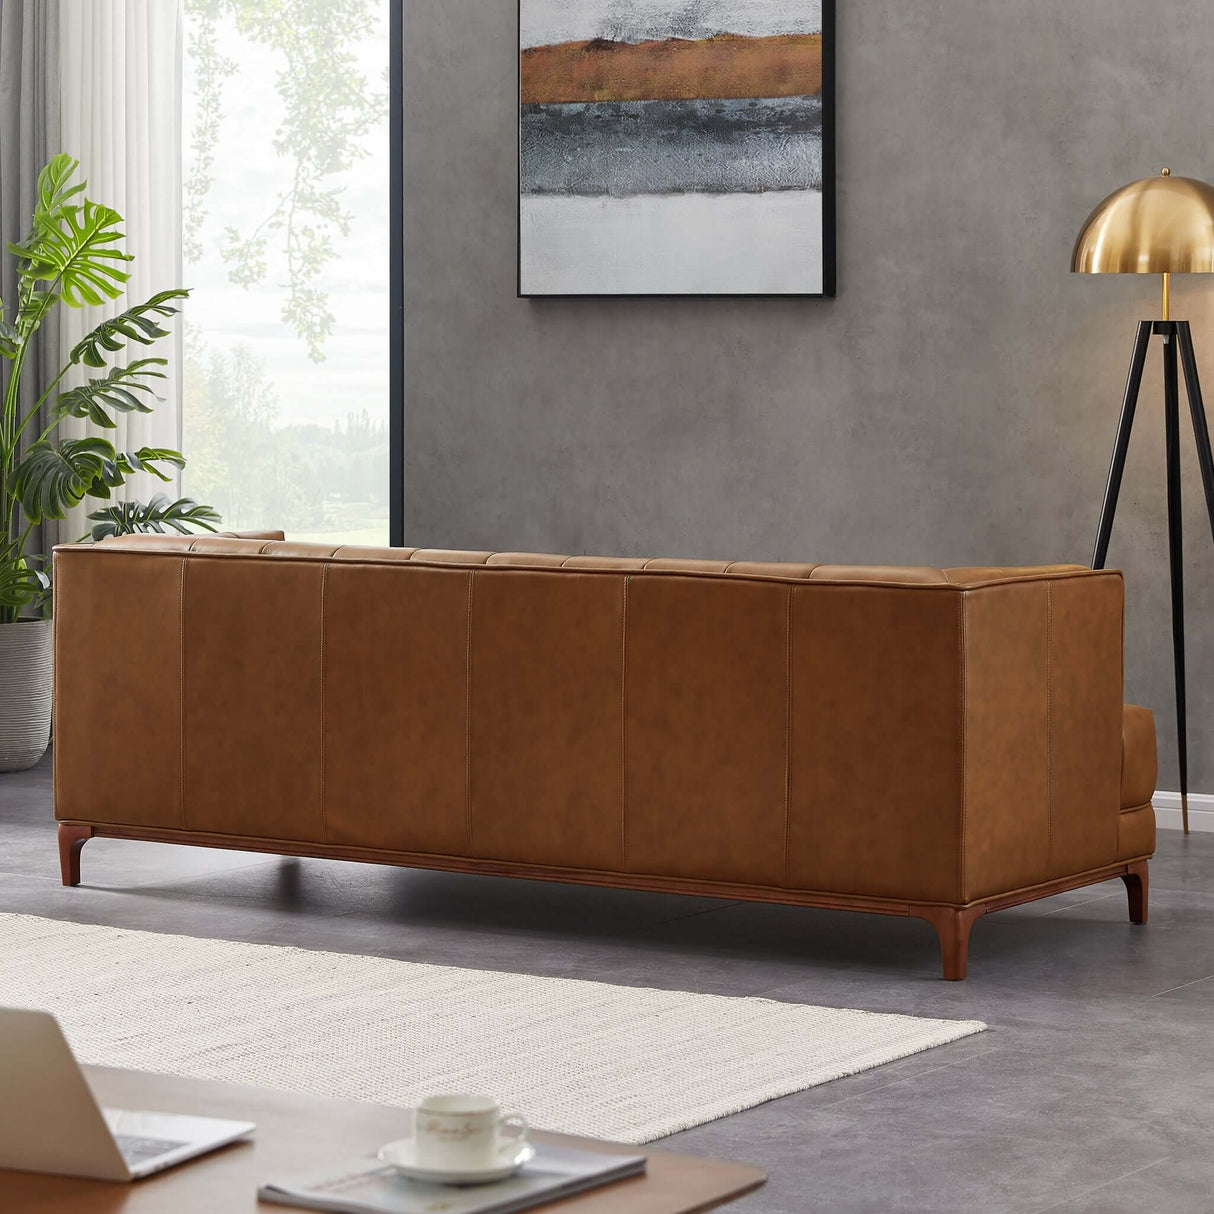 Brown leather tufted sofa